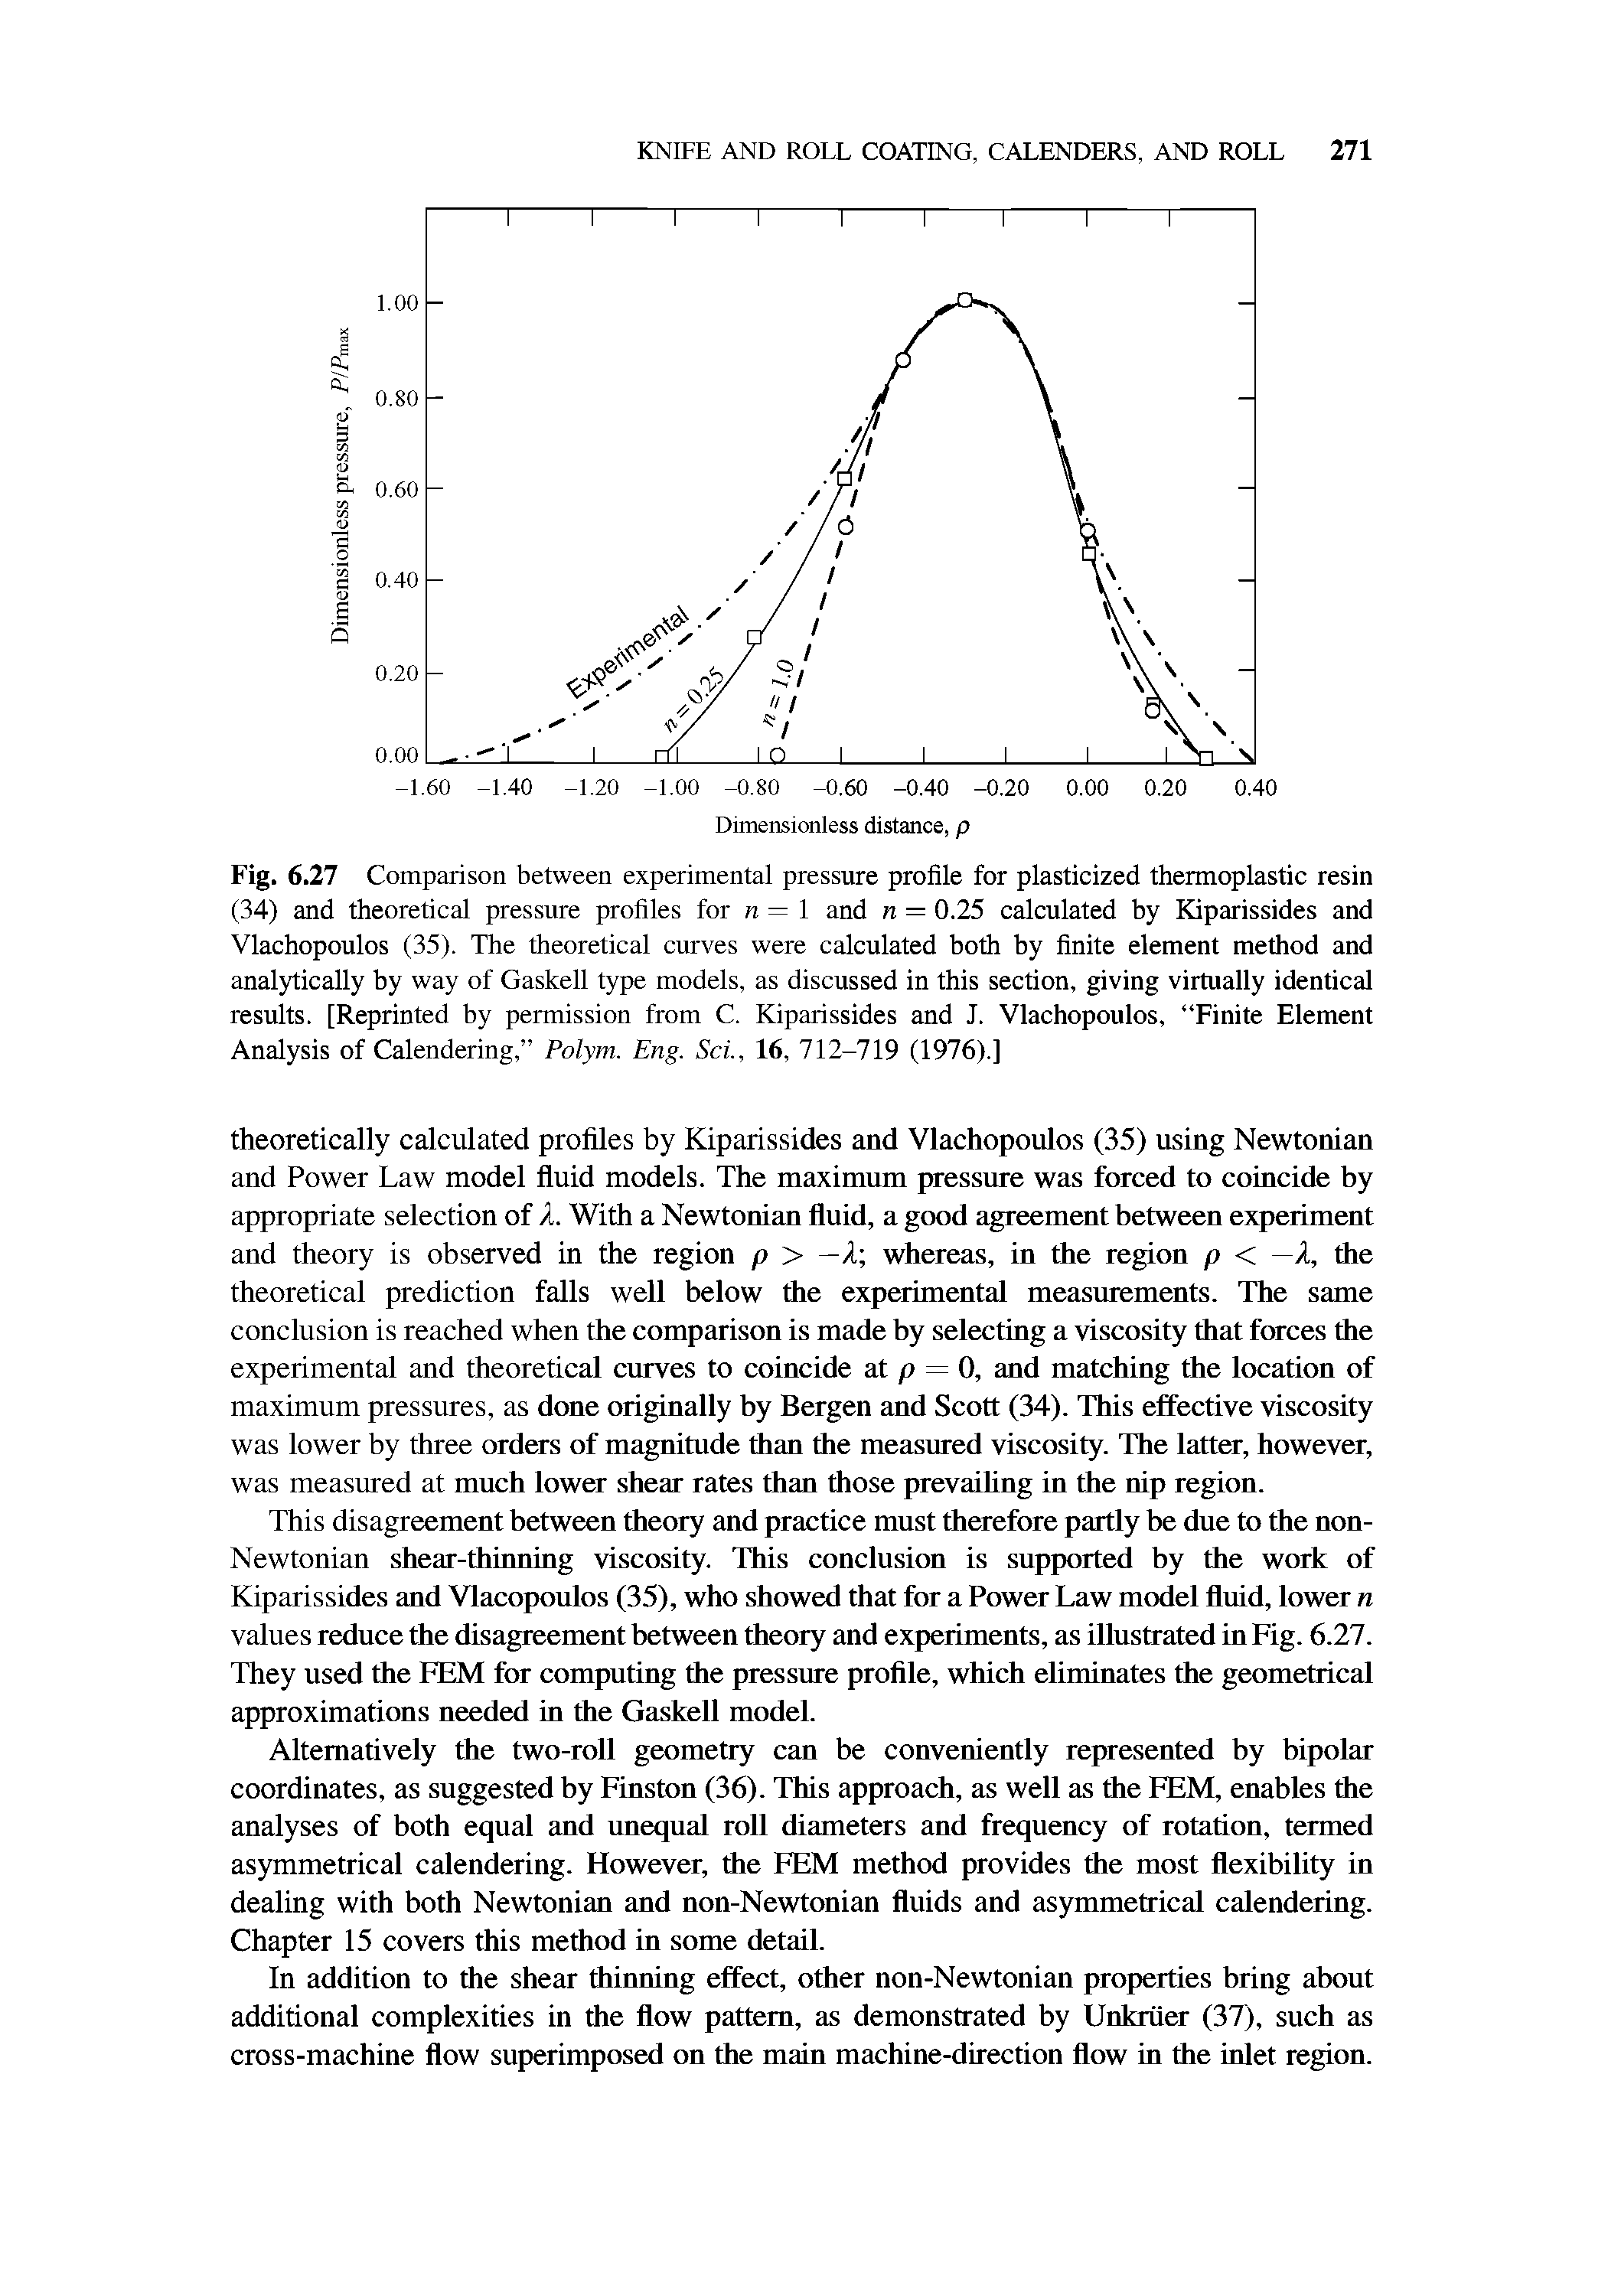 Fig. 6.27 Comparison between experimental pressure profile for plasticized thermoplastic resin (34) and theoretical pressure profiles for n — 1 and n — 0.25 calculated by Kiparissides and Vlachopoulos (35). The theoretical curves were calculated both by finite element method and analytically by way of Gaskell type models, as discussed in this section, giving virtually identical results. [Reprinted by permission from C. Kiparissides and J. Vlachopoulos, Finite Element Analysis of Calendering, Polym. Eng. Set, 16, 712-719 (1976).]...